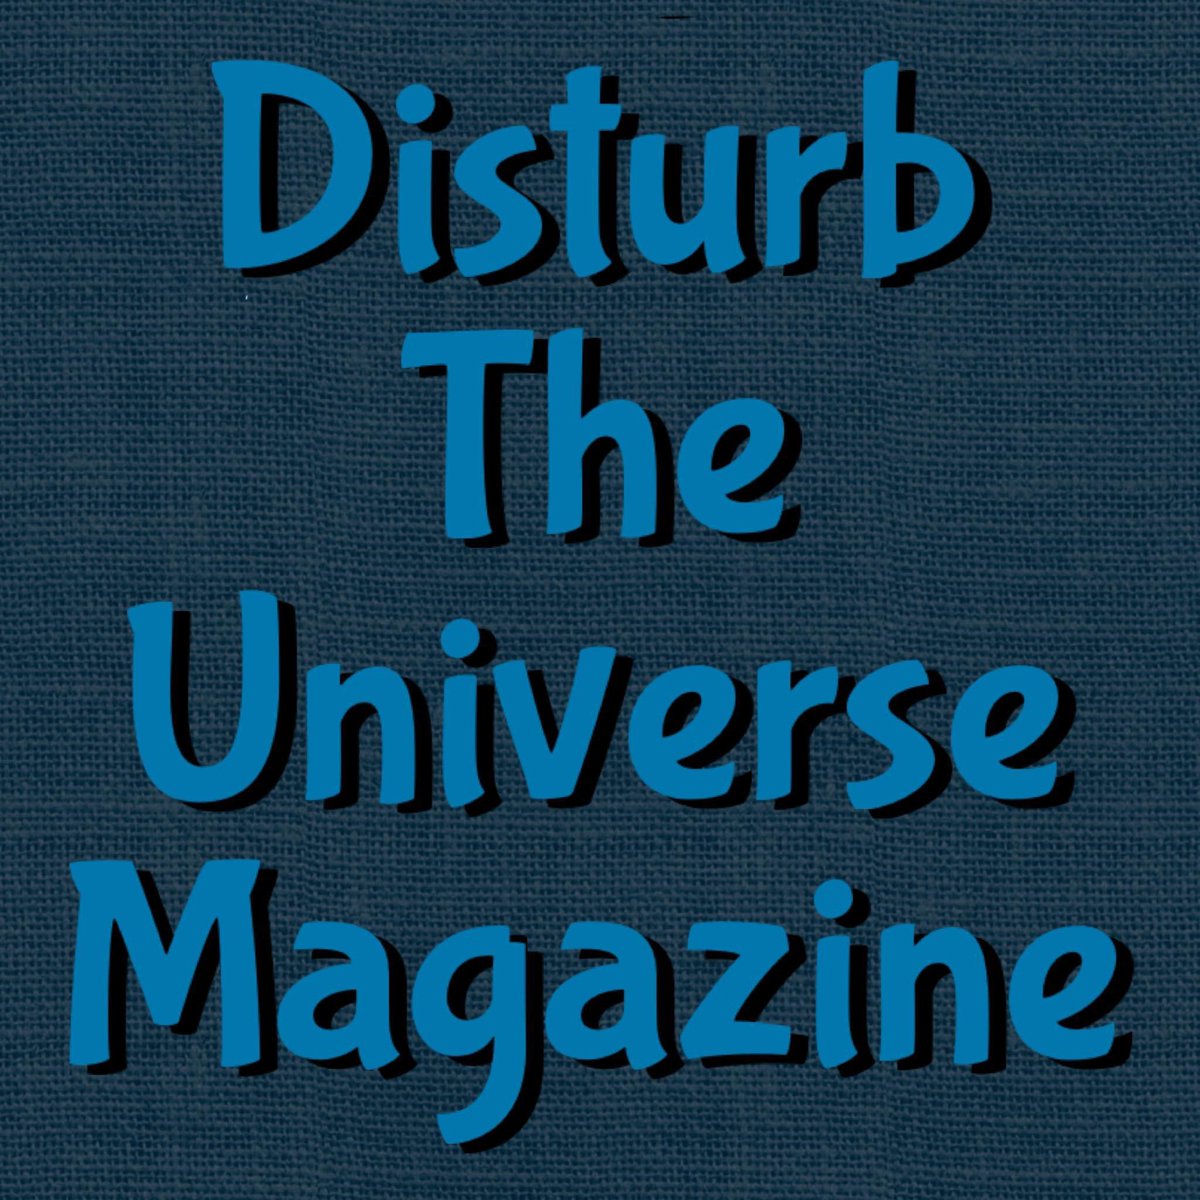 Up today at Disturb The Universe Magazine 

An Almost True Story by Oliver Kleyer

disturbtheuniversemagazine.com/2024/05/an-alm…

#publishedwriting #disturbtheuniversemagazine #published #writingcommunity #poetry #writing #publishedpoetry #poetrylovers #poetrytwitter #poetrycommunity